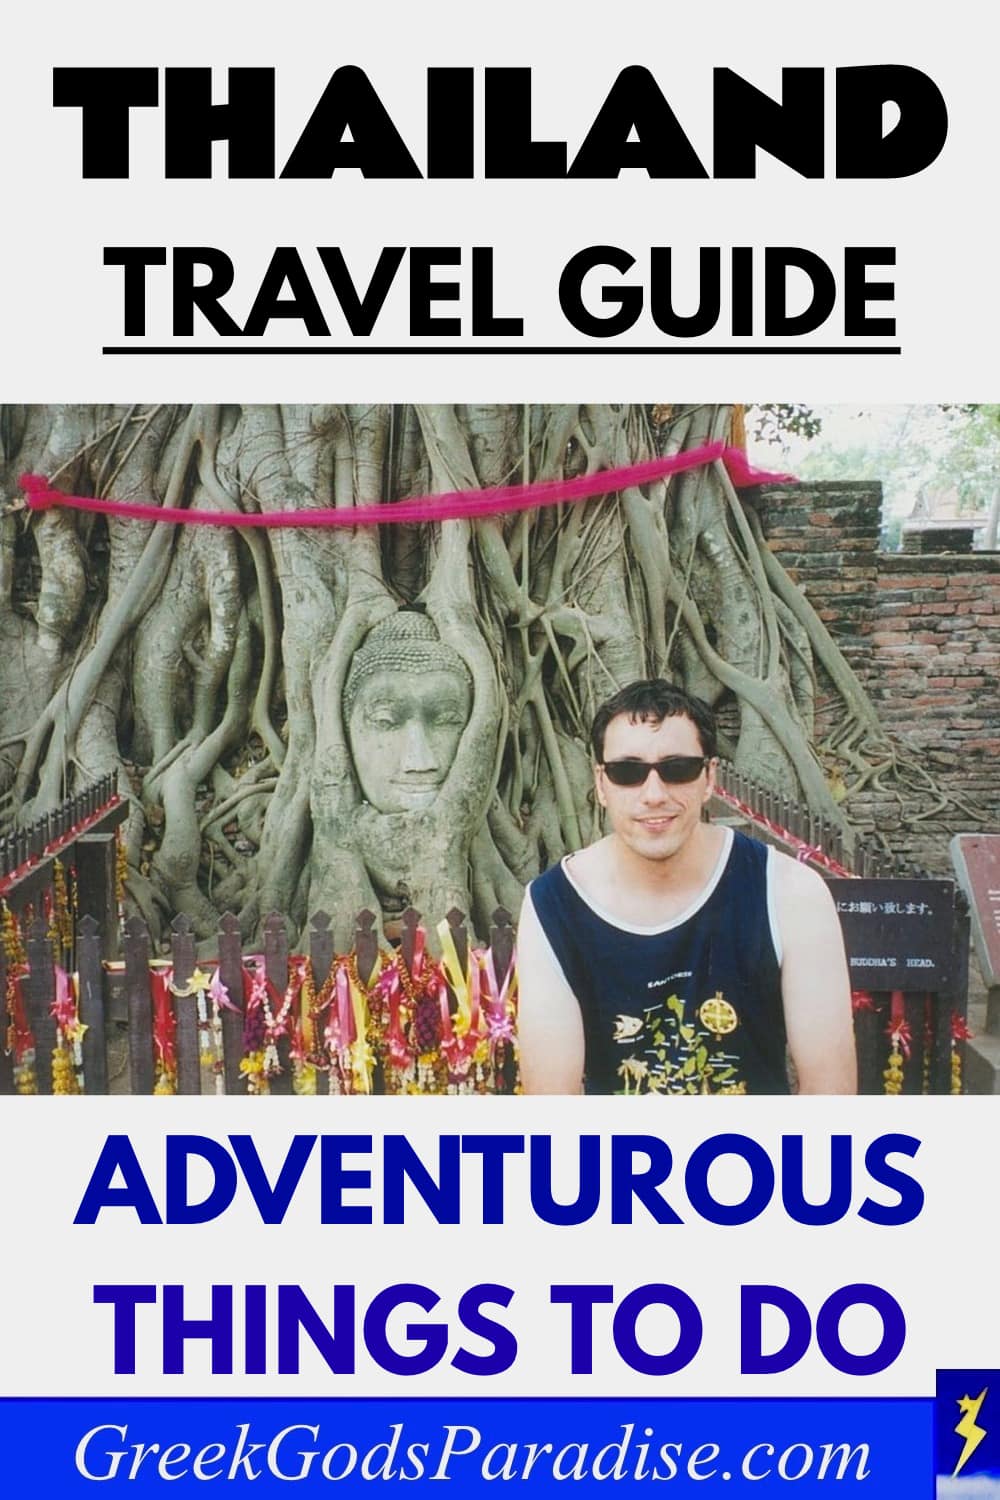 Thailand Travel Guide Adventurous Things to Do